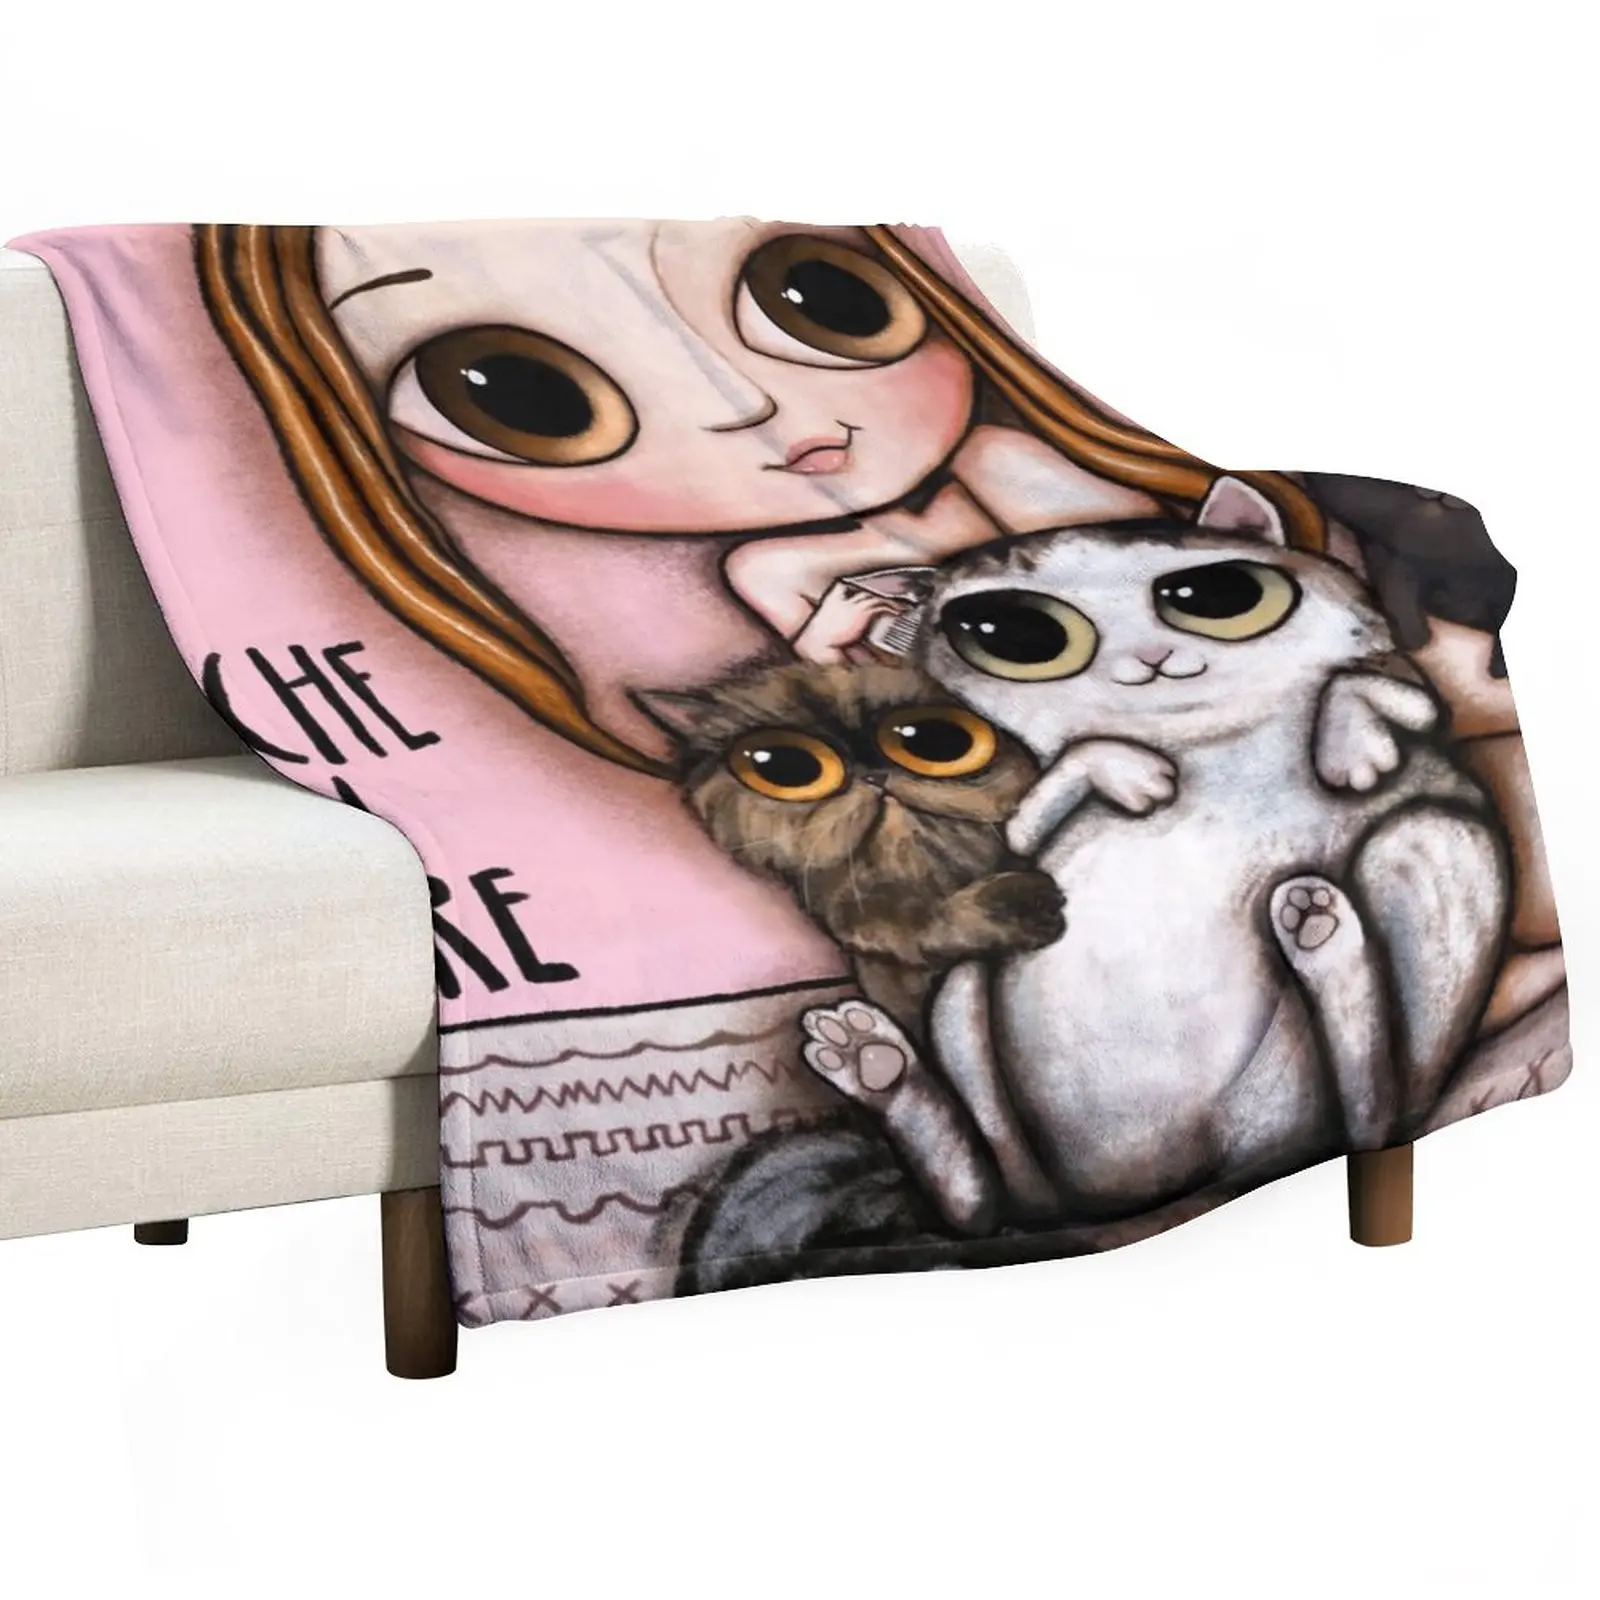 

The doll and the cats Throw Blanket Dorm Room Essentials Fluffy Blankets Large Luxury Blanket Soft Blanket